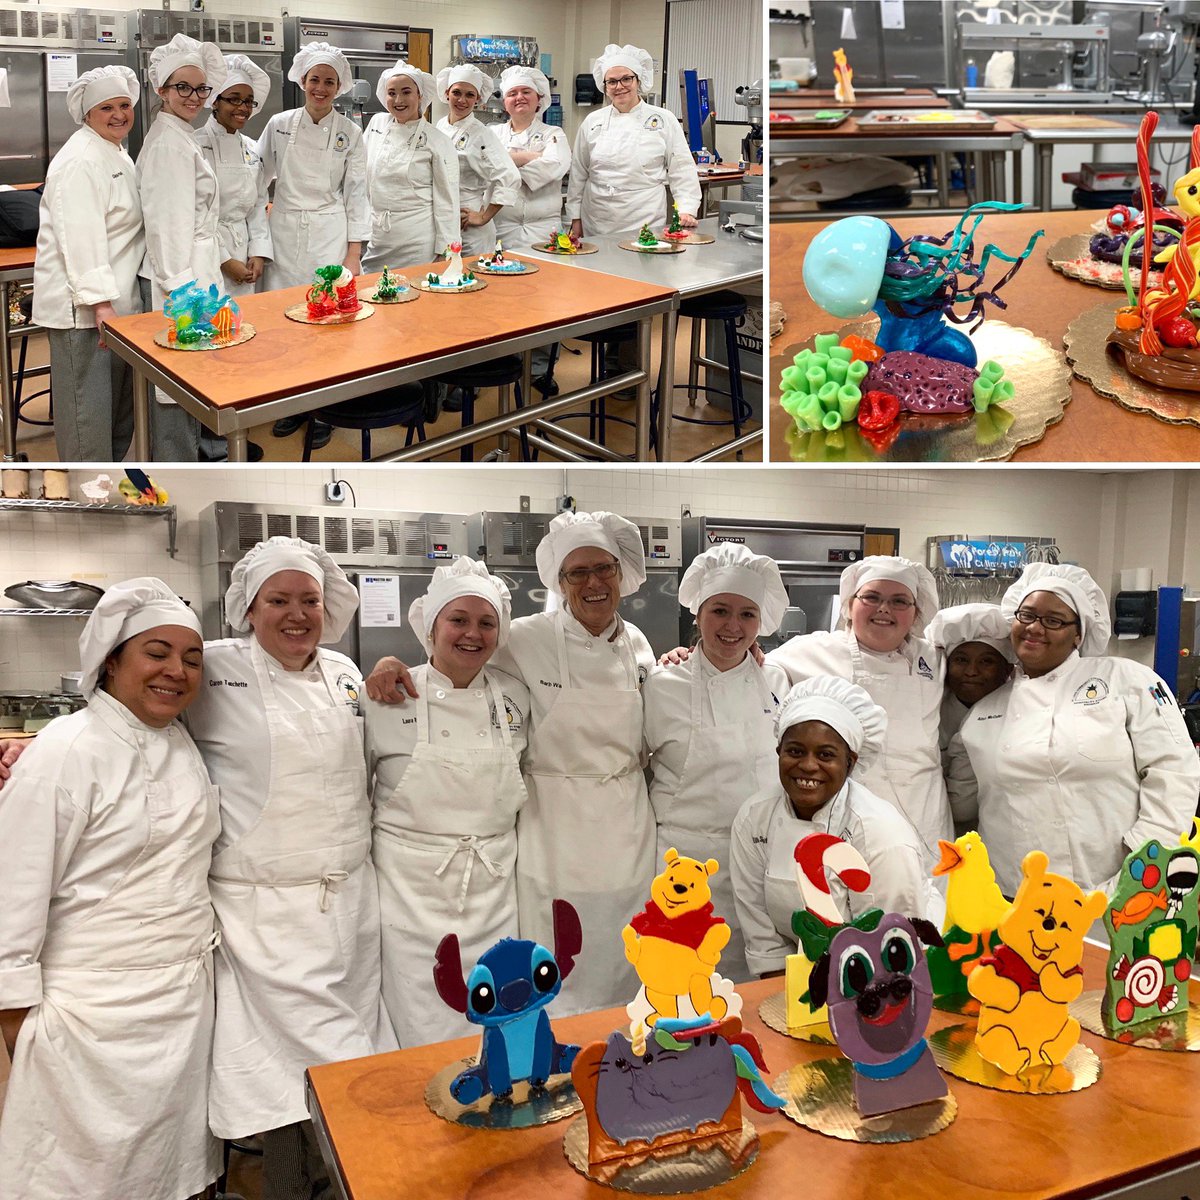 Wrapping it up with our students for Christmas break! 
Happy holidays everyone!
@stlccedu @stlpastry 
#ChefMartin #gastronomía  #culinary #culinaryarts #sugar #culinarytalents #culinarystudent #culinaryschool